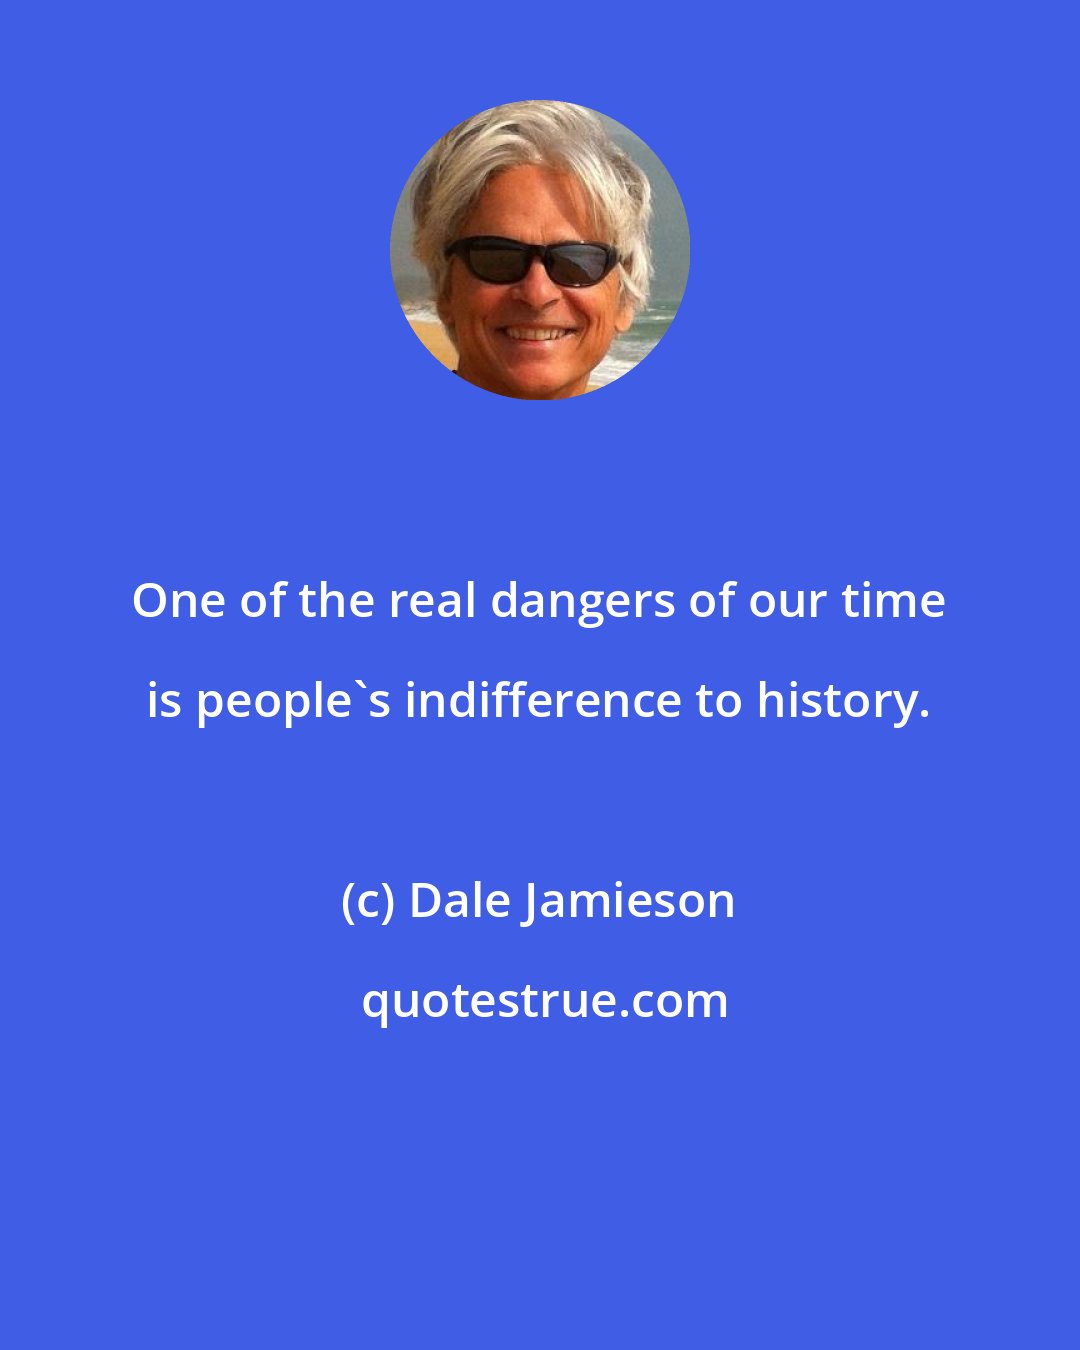 Dale Jamieson: One of the real dangers of our time is people's indifference to history.